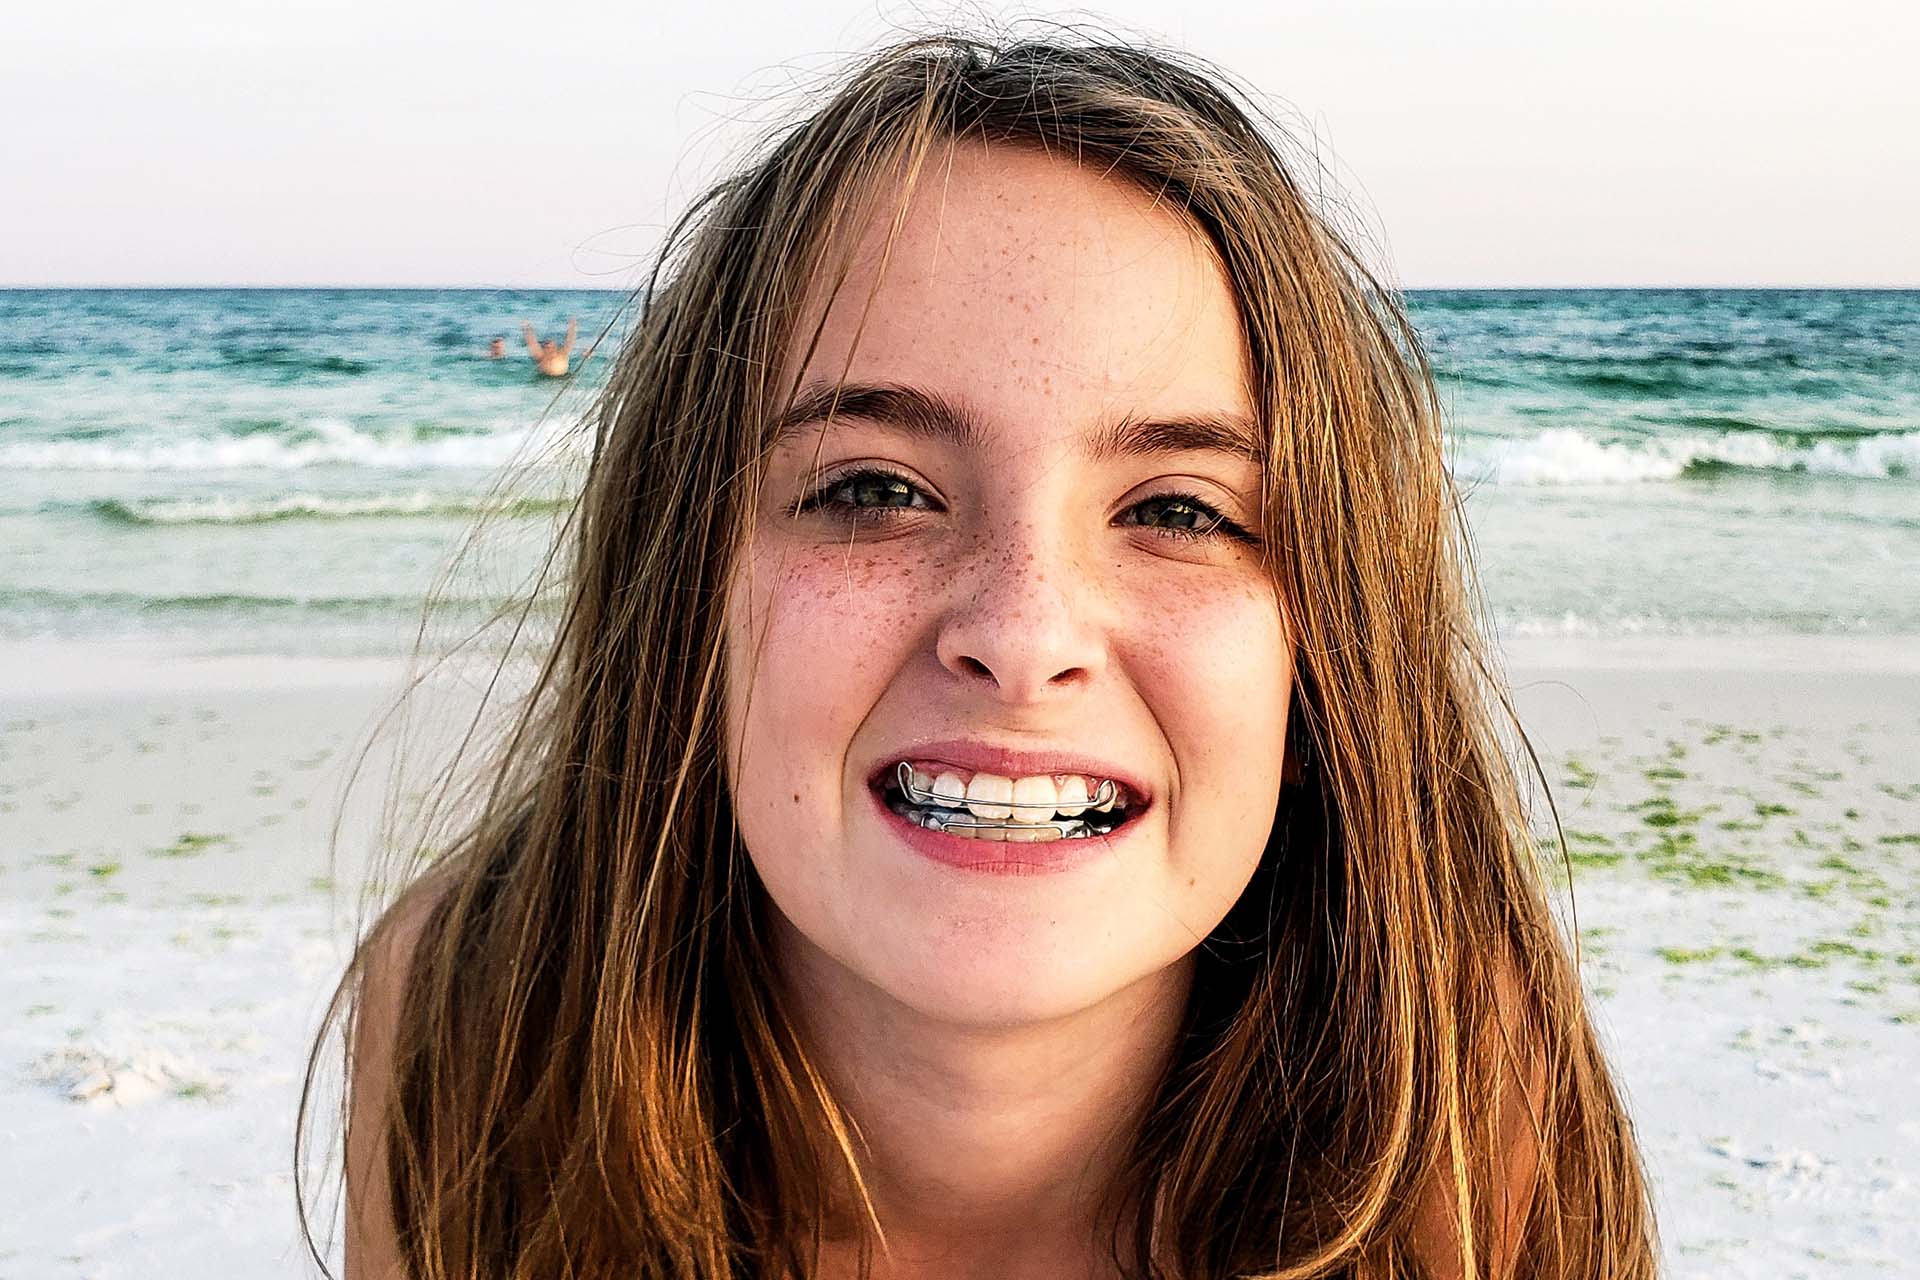 Young girl at a beach in Los Angeles showing off her Hawley retainer and permanent retainer in her mouth